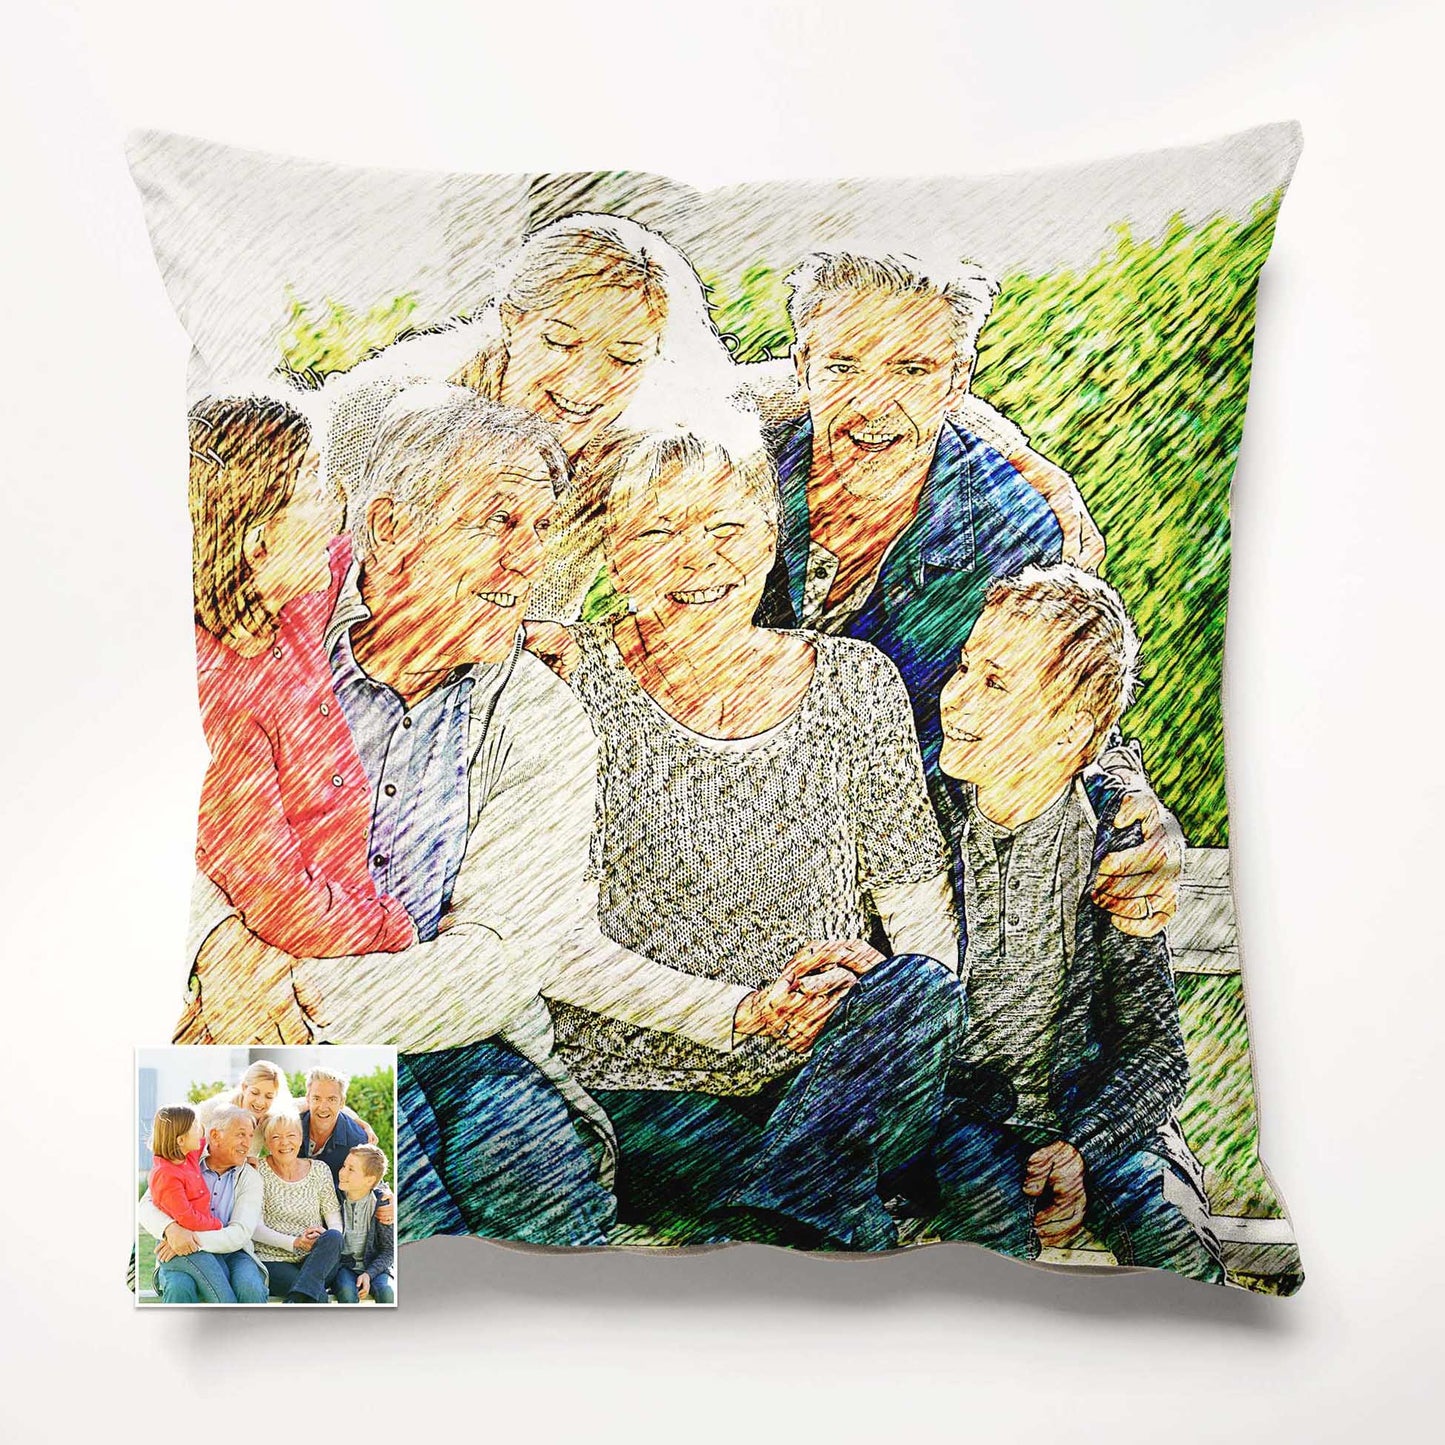 Elevate your relaxation experience with our bespoke Artsy Illustration Cushion. Featuring a print from your favorite photo, this cushion offers a unique and personalized touch to your space. Its soft velvet fabric for cosy comfort